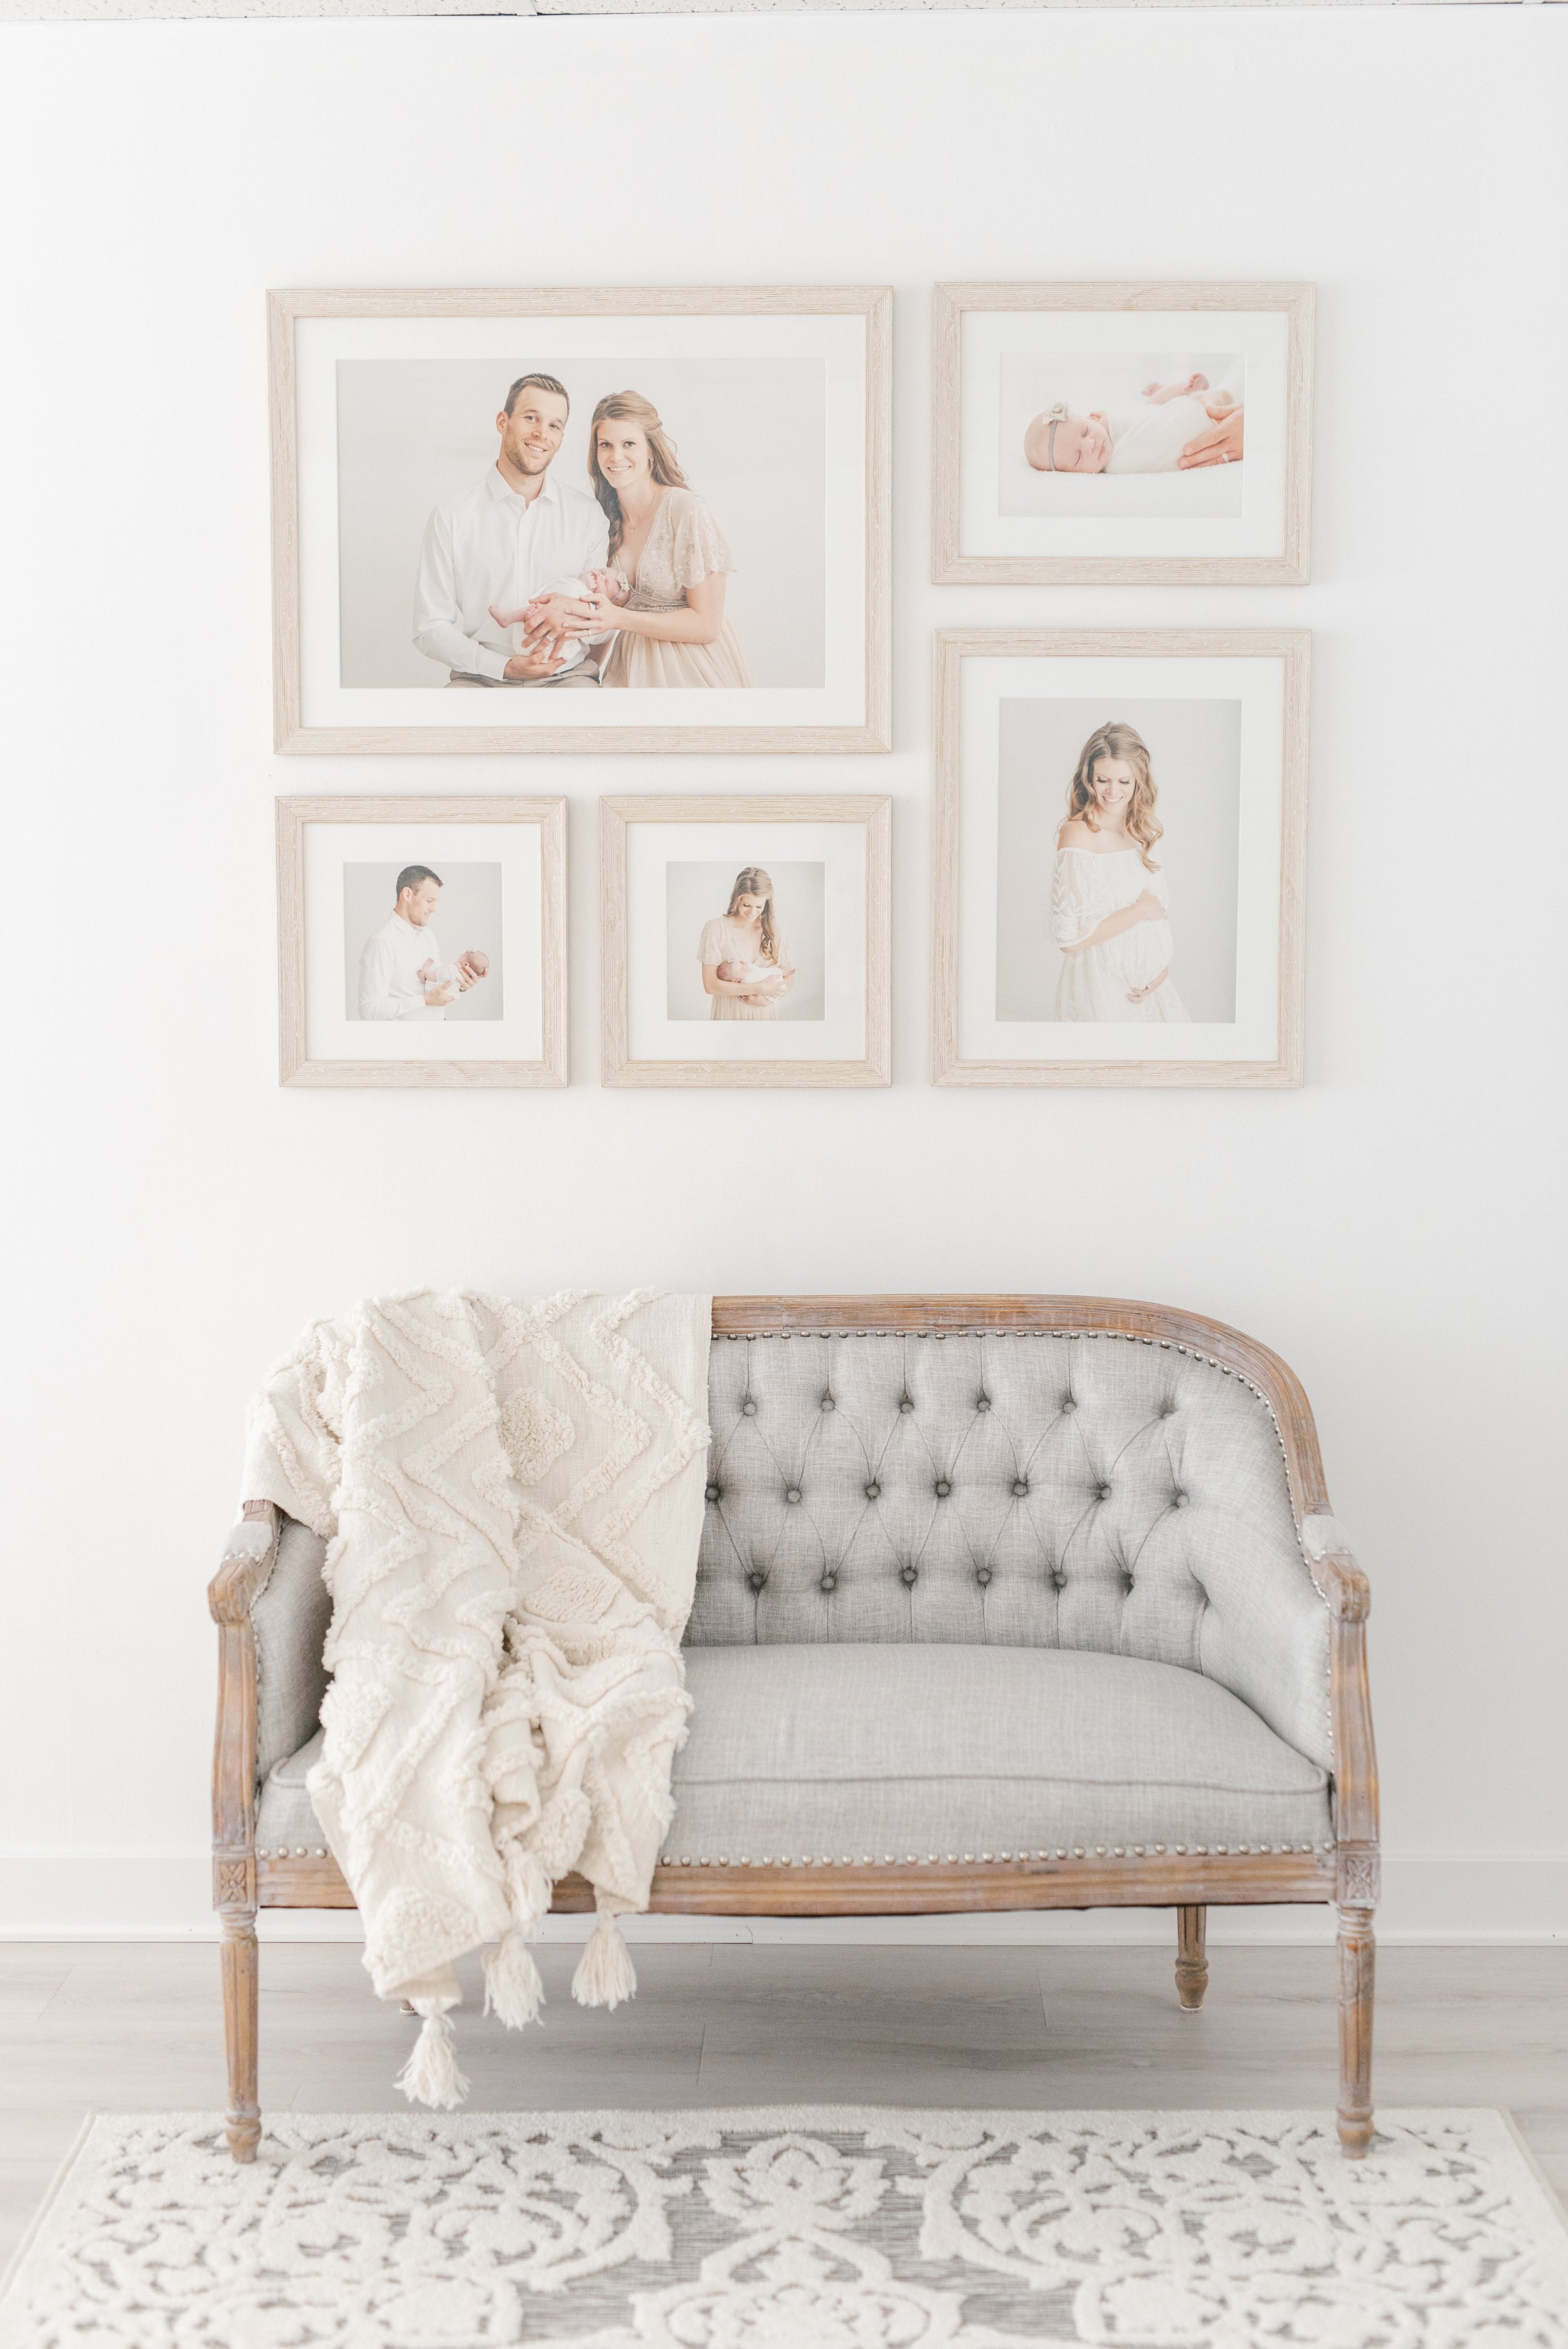   Gallery wall with five framed prints of maternity photos and newborn portraits, hung above a vintage settee. Gallery wall inspiration #EssexCountyFamilyPhotographer #PassaicCountyFamilyPhotographer #NorthernNewJerseyFamilyPhotographer #NorthernNewJ